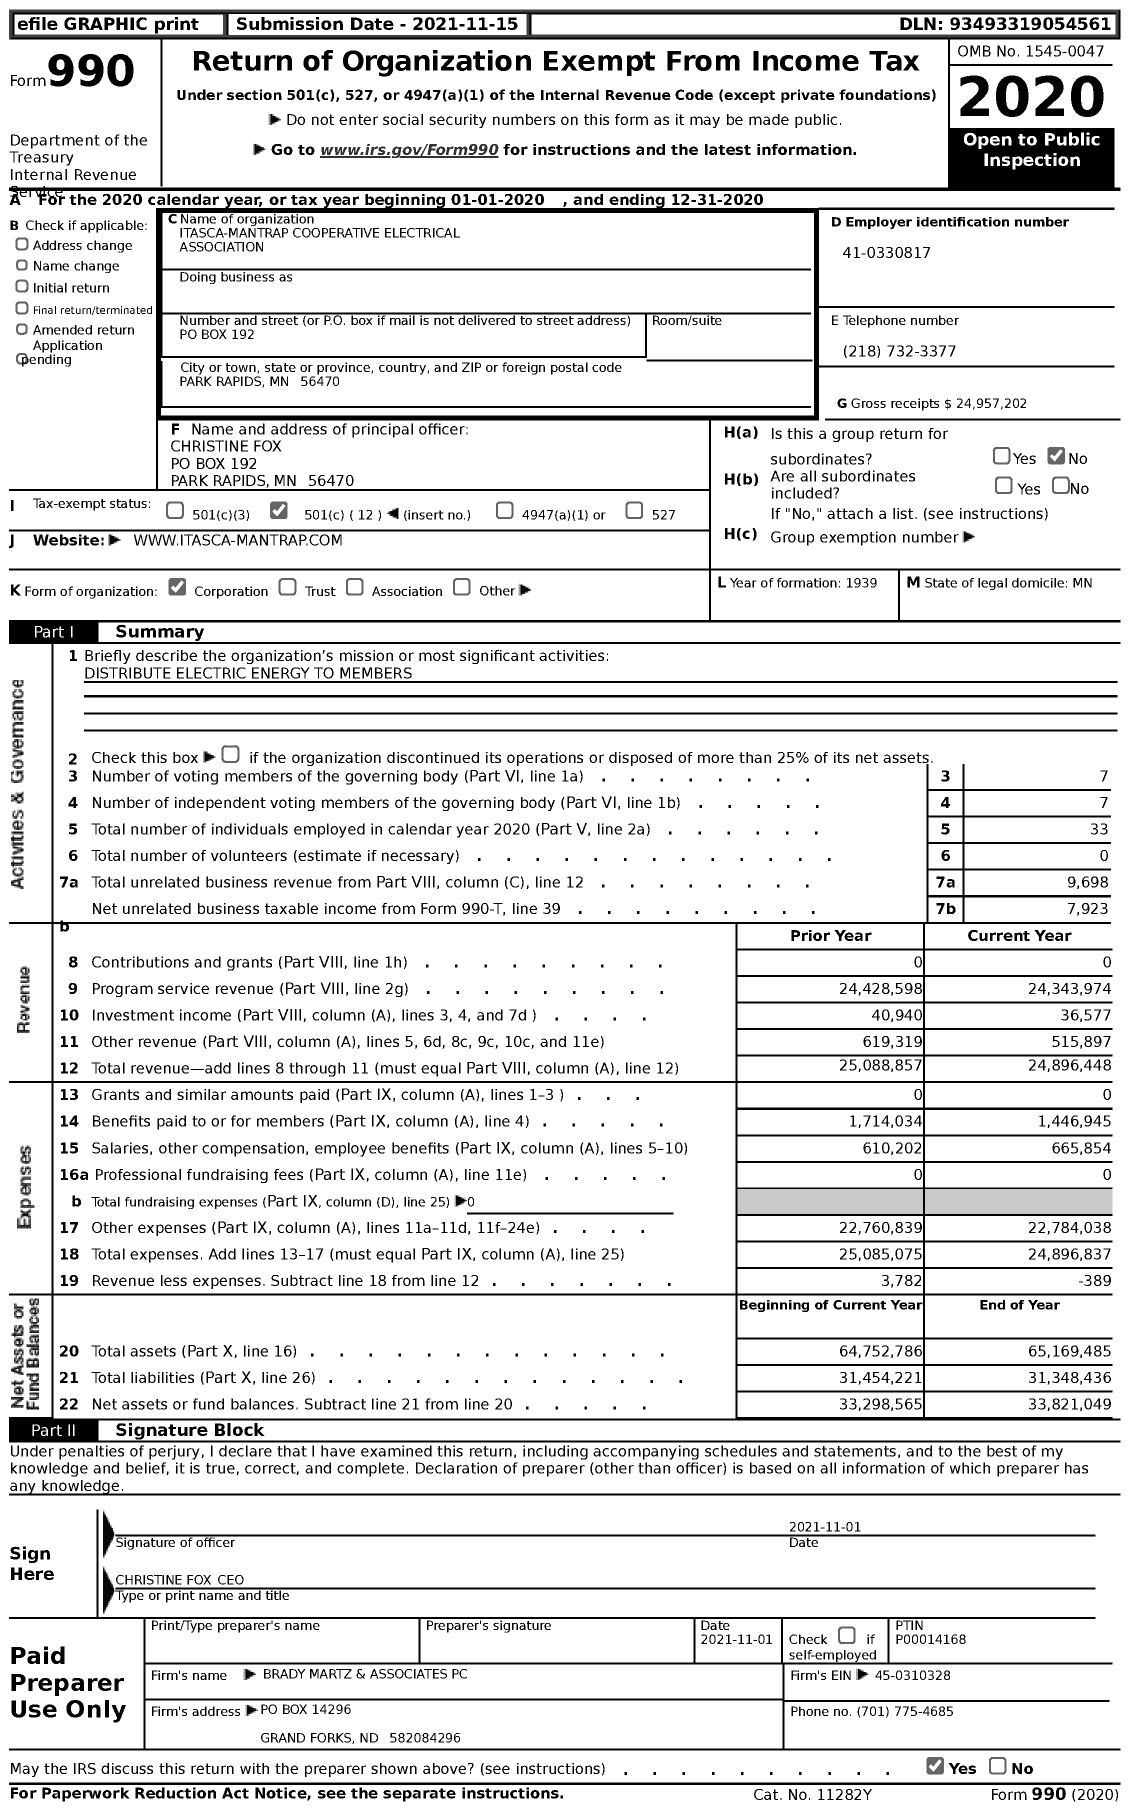 Image of first page of 2020 Form 990 for Itasca-Mantrap Cooperative Electrical Association